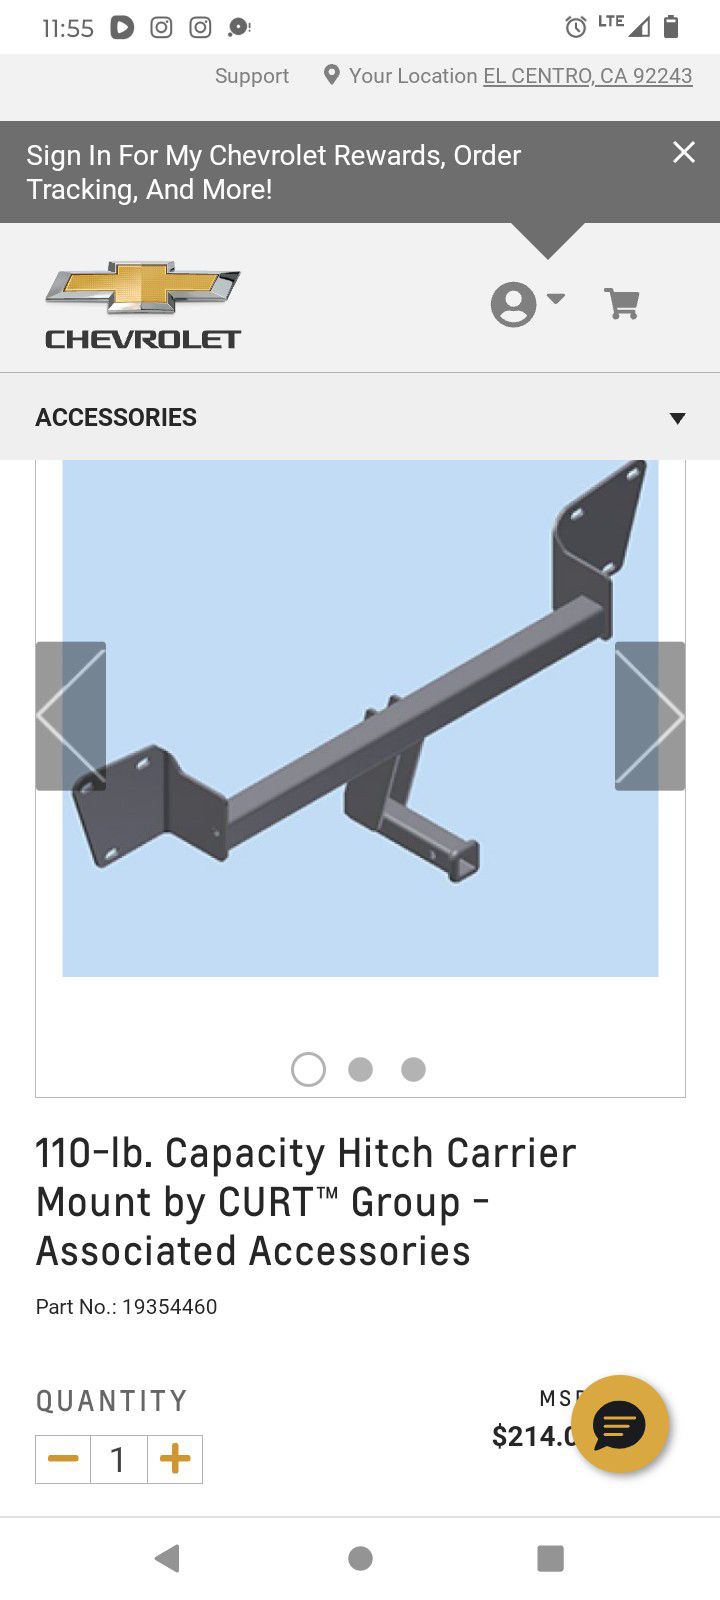 Hitch carrier